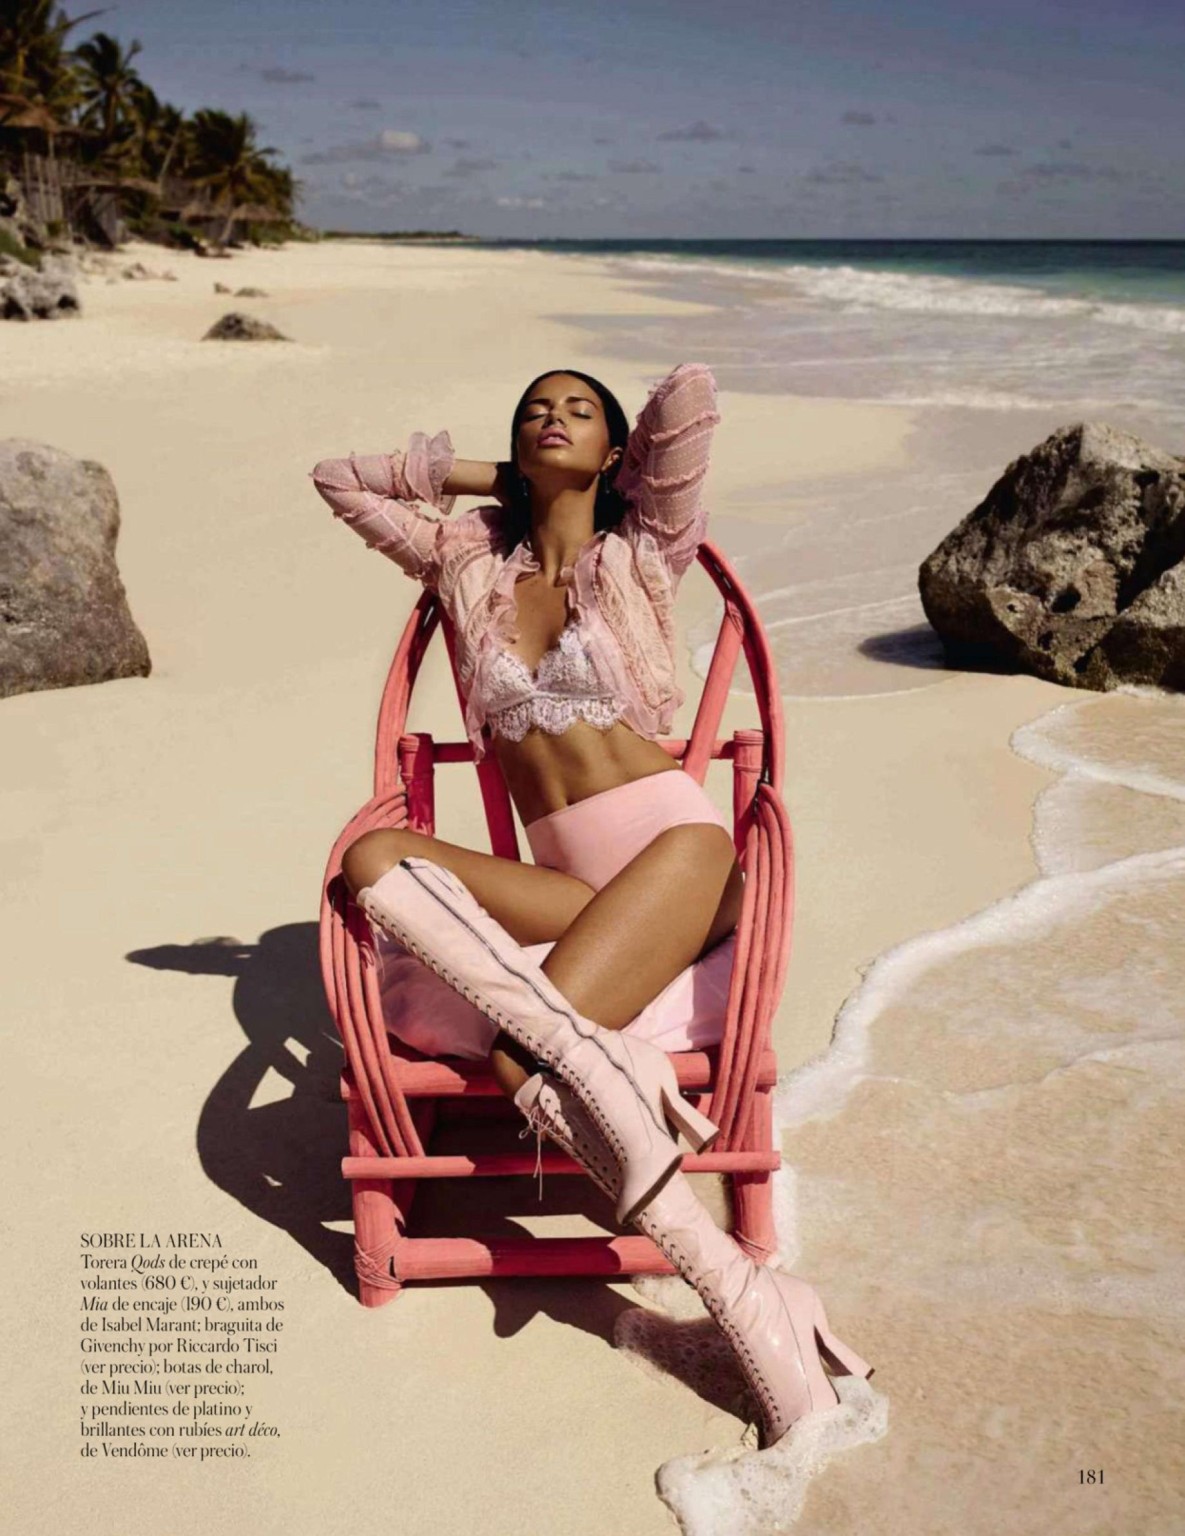 Adriana Lima looking very hot in Vogue Spain photoshoot #75198215